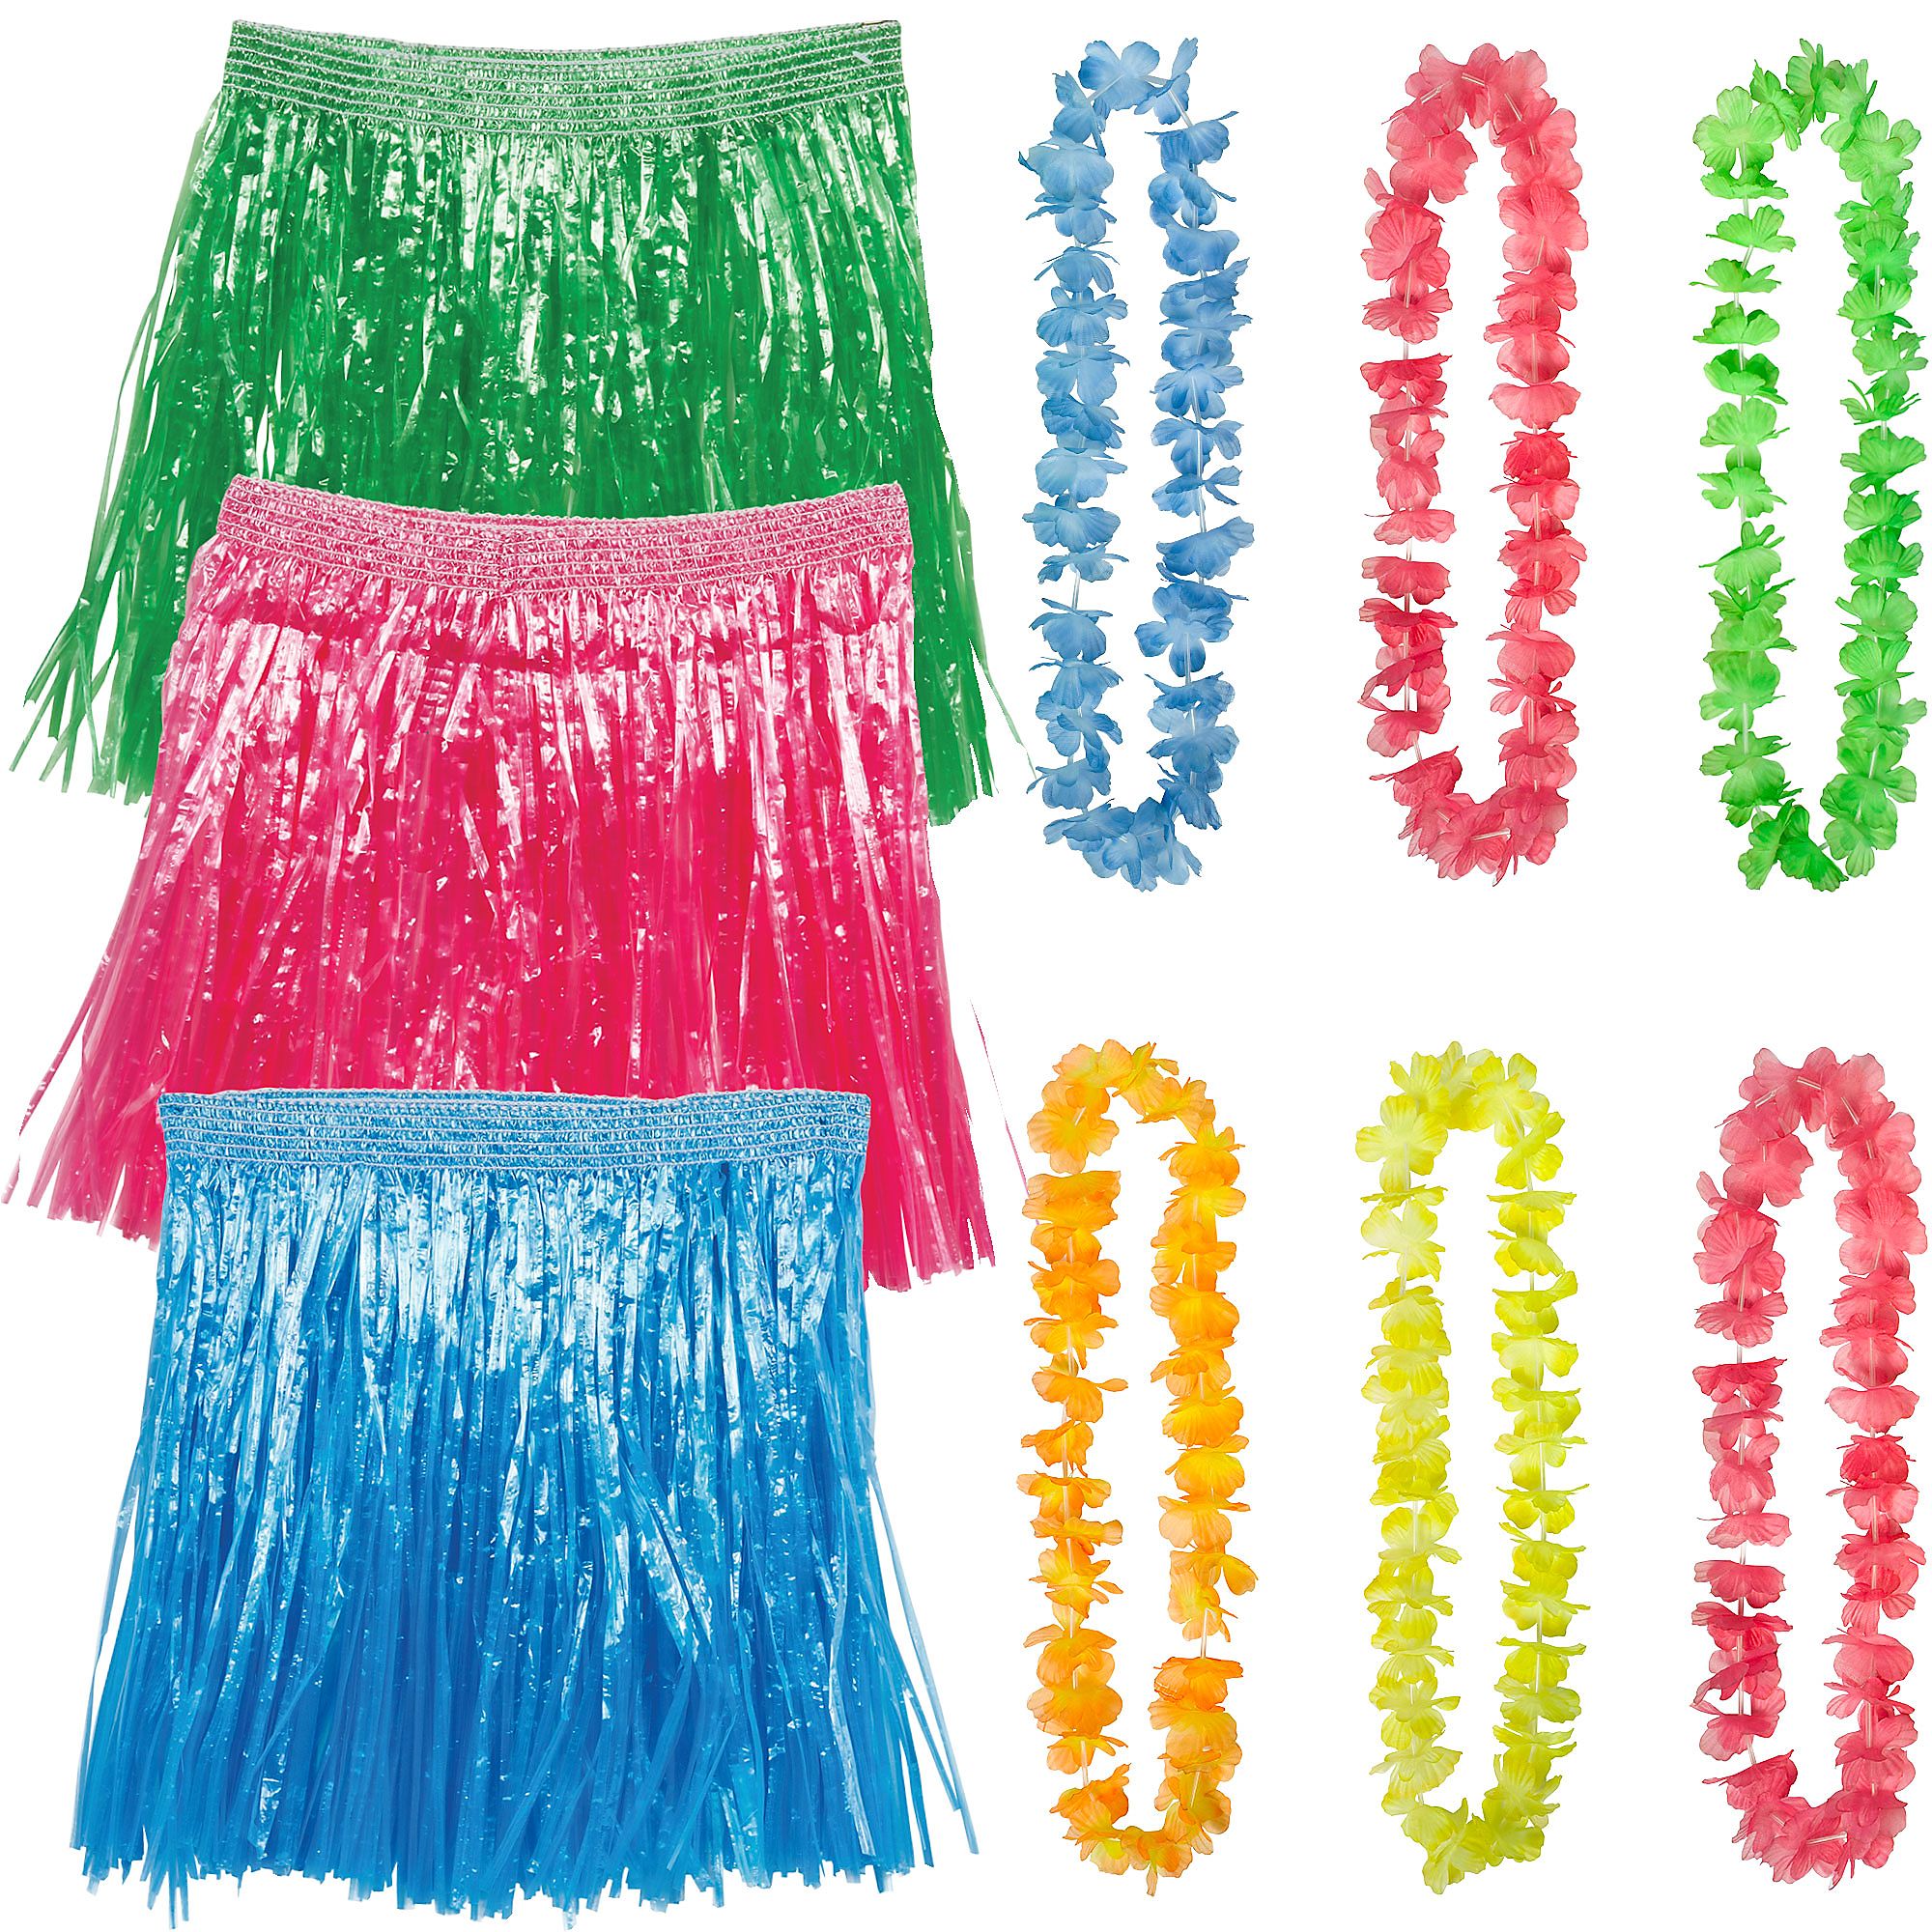 Floral Luau Hula Skirt Adult Costume Accessory Kit for 6 Guests ...